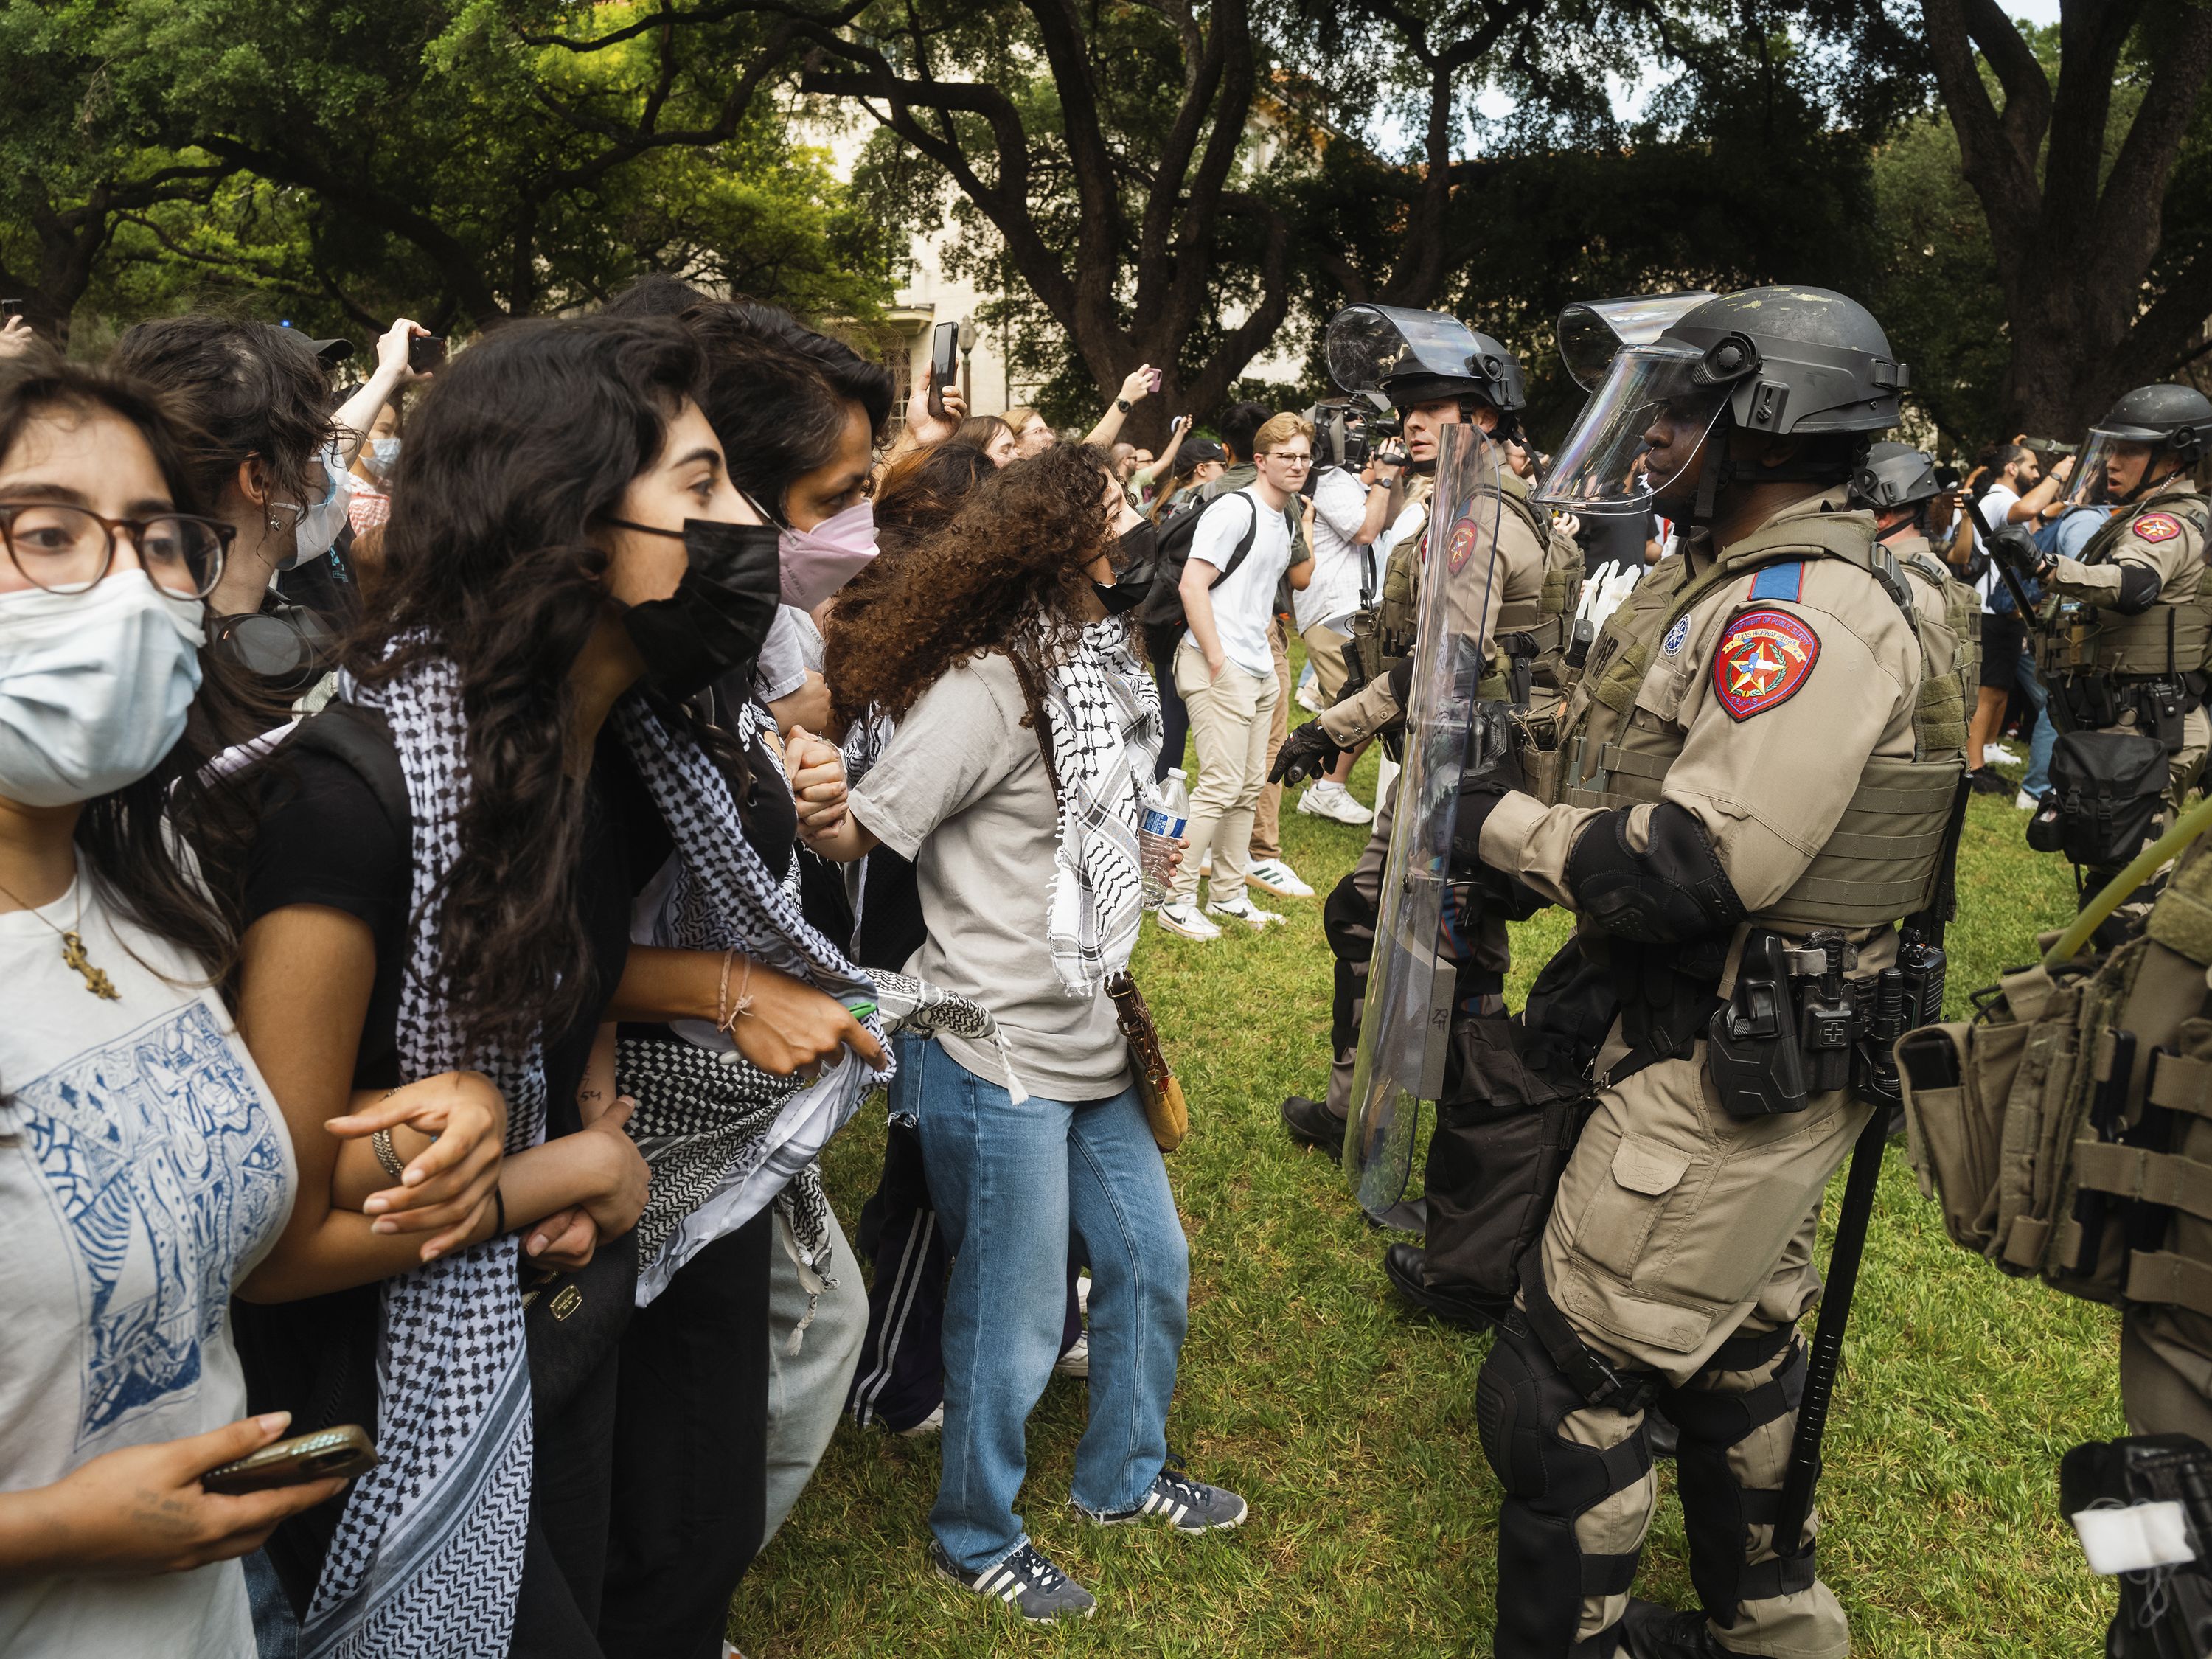 Demonstrators and Texas state troopers face one another in Austin on April 24.